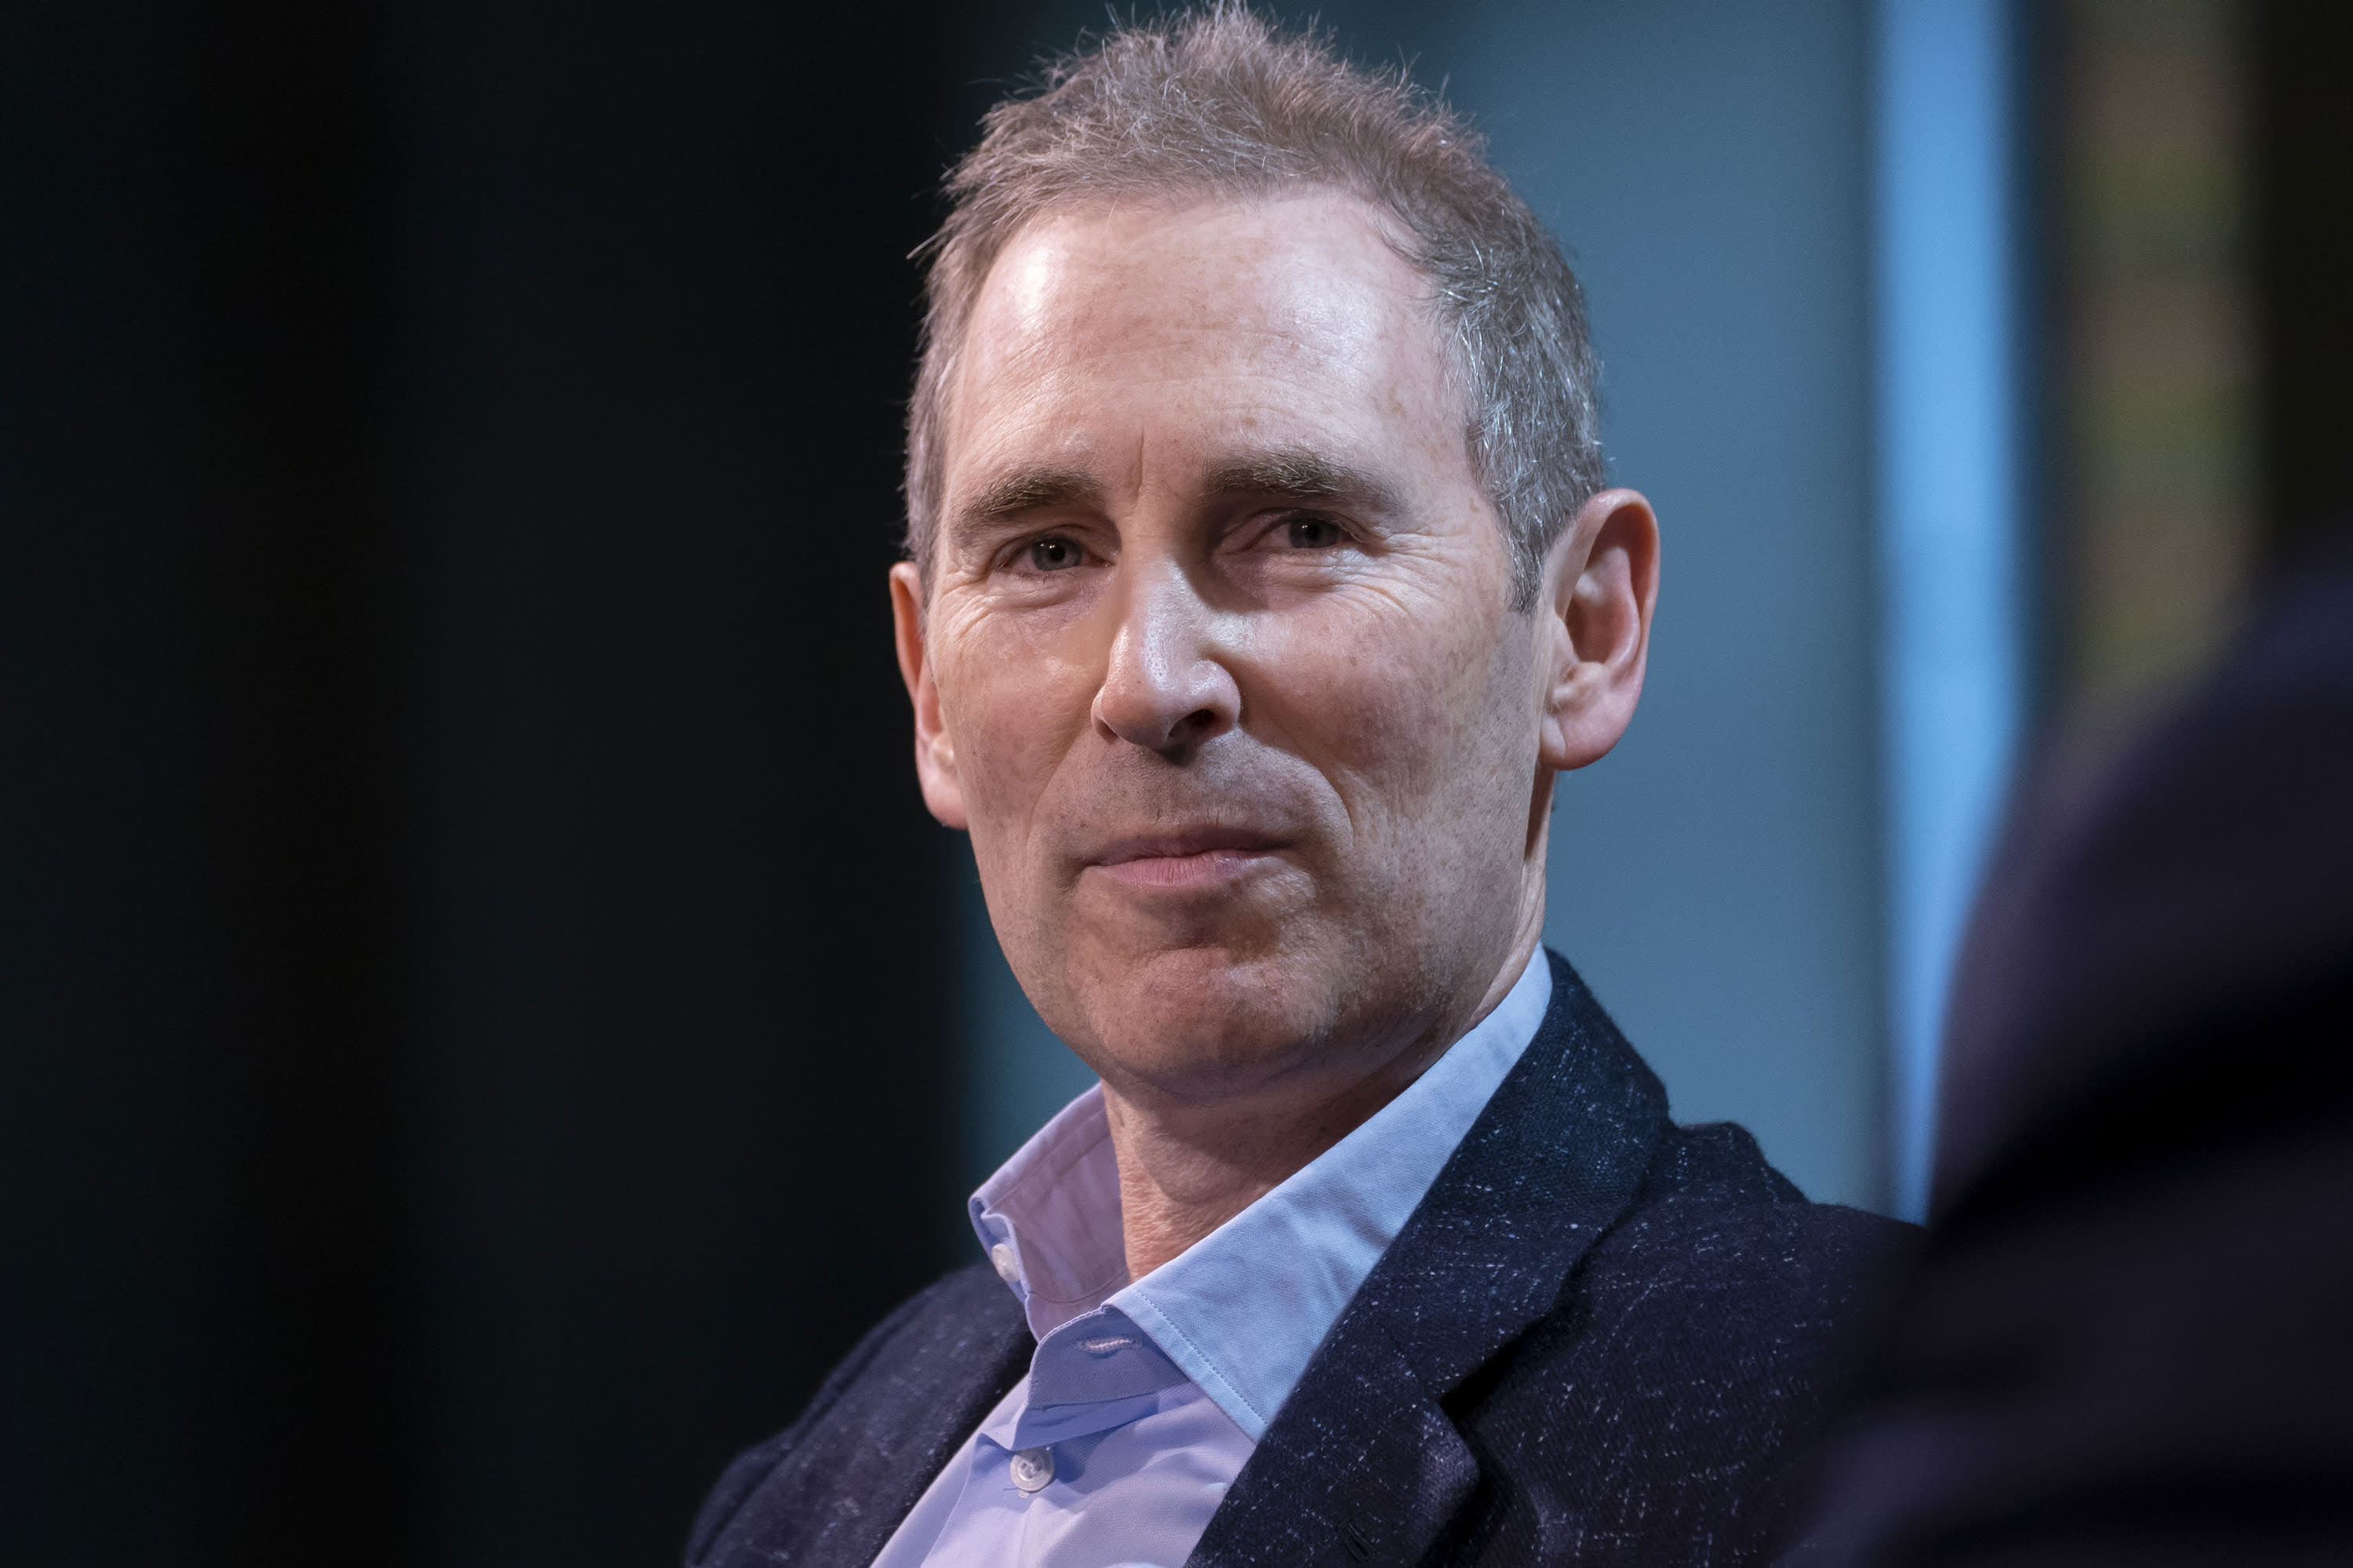 Andy Jassy just wrapped up a rocky first year after as Amazon CEO